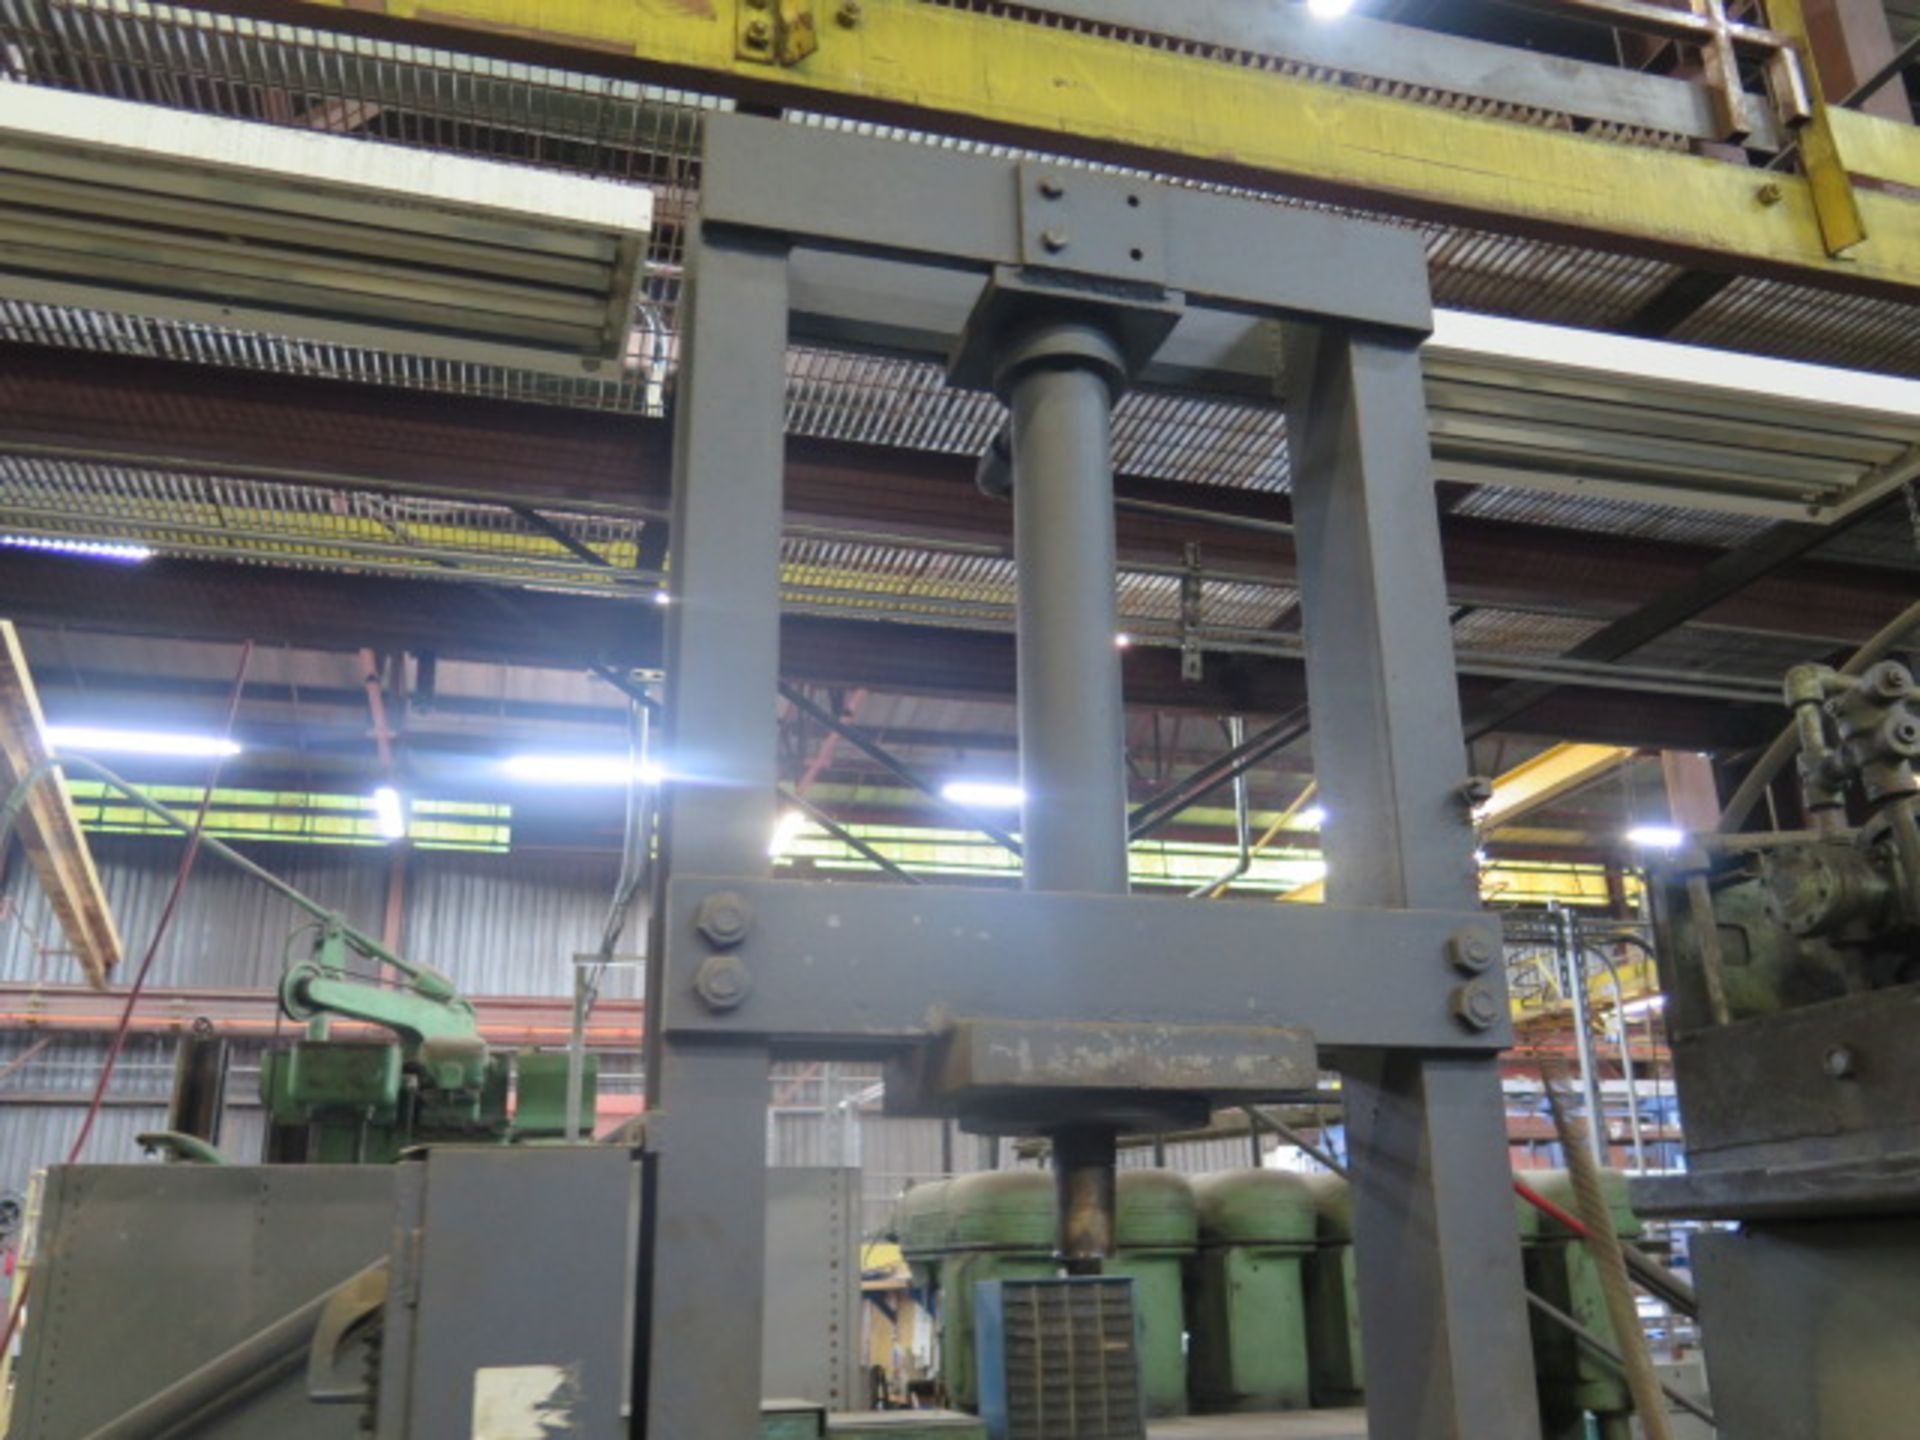 Hydraulic Long Stroke H-Frame Press (SOLD AS-IS - NO WARRANTY) - Image 3 of 8